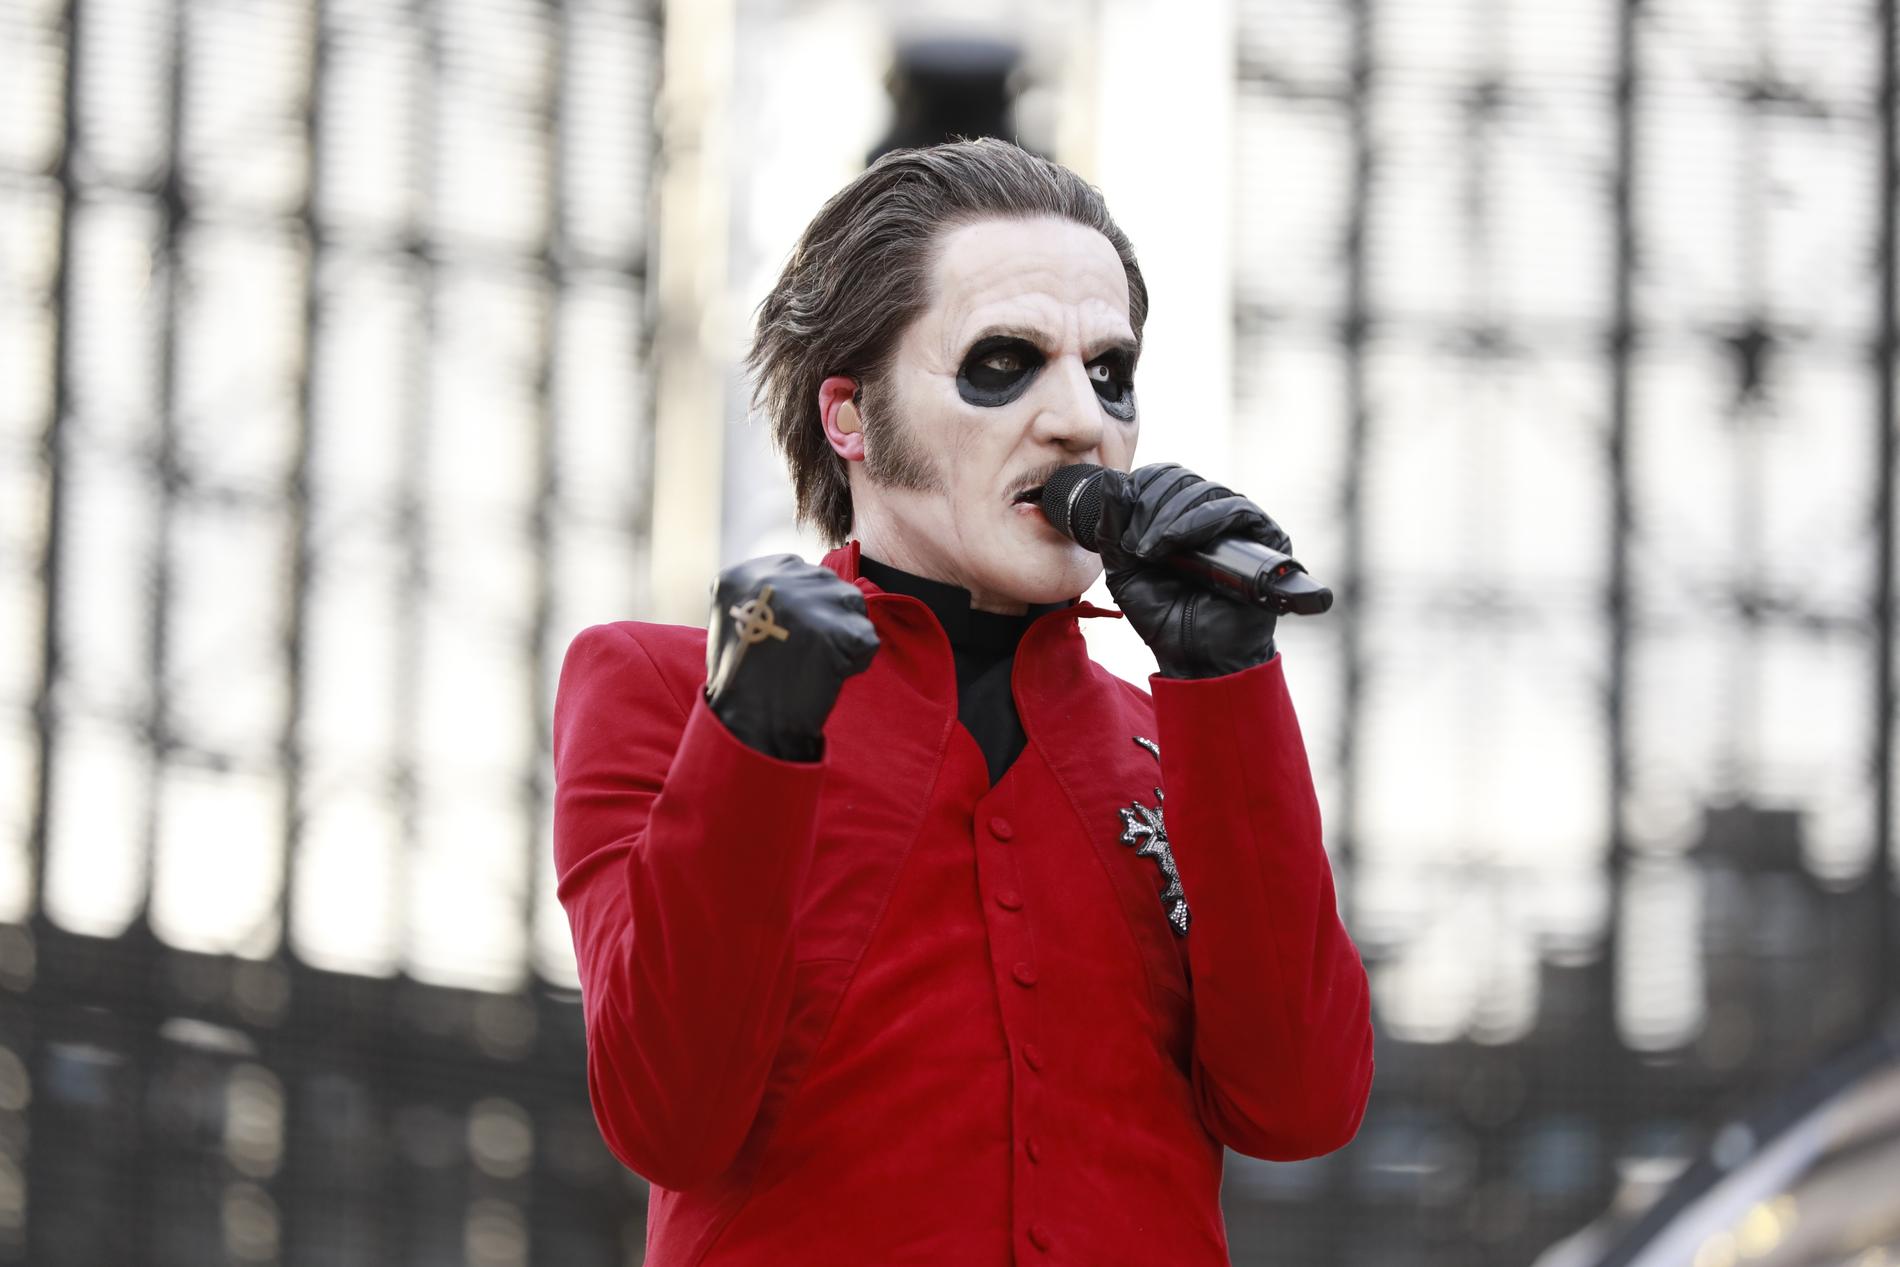 Ghosts frontman Tobias Forge.